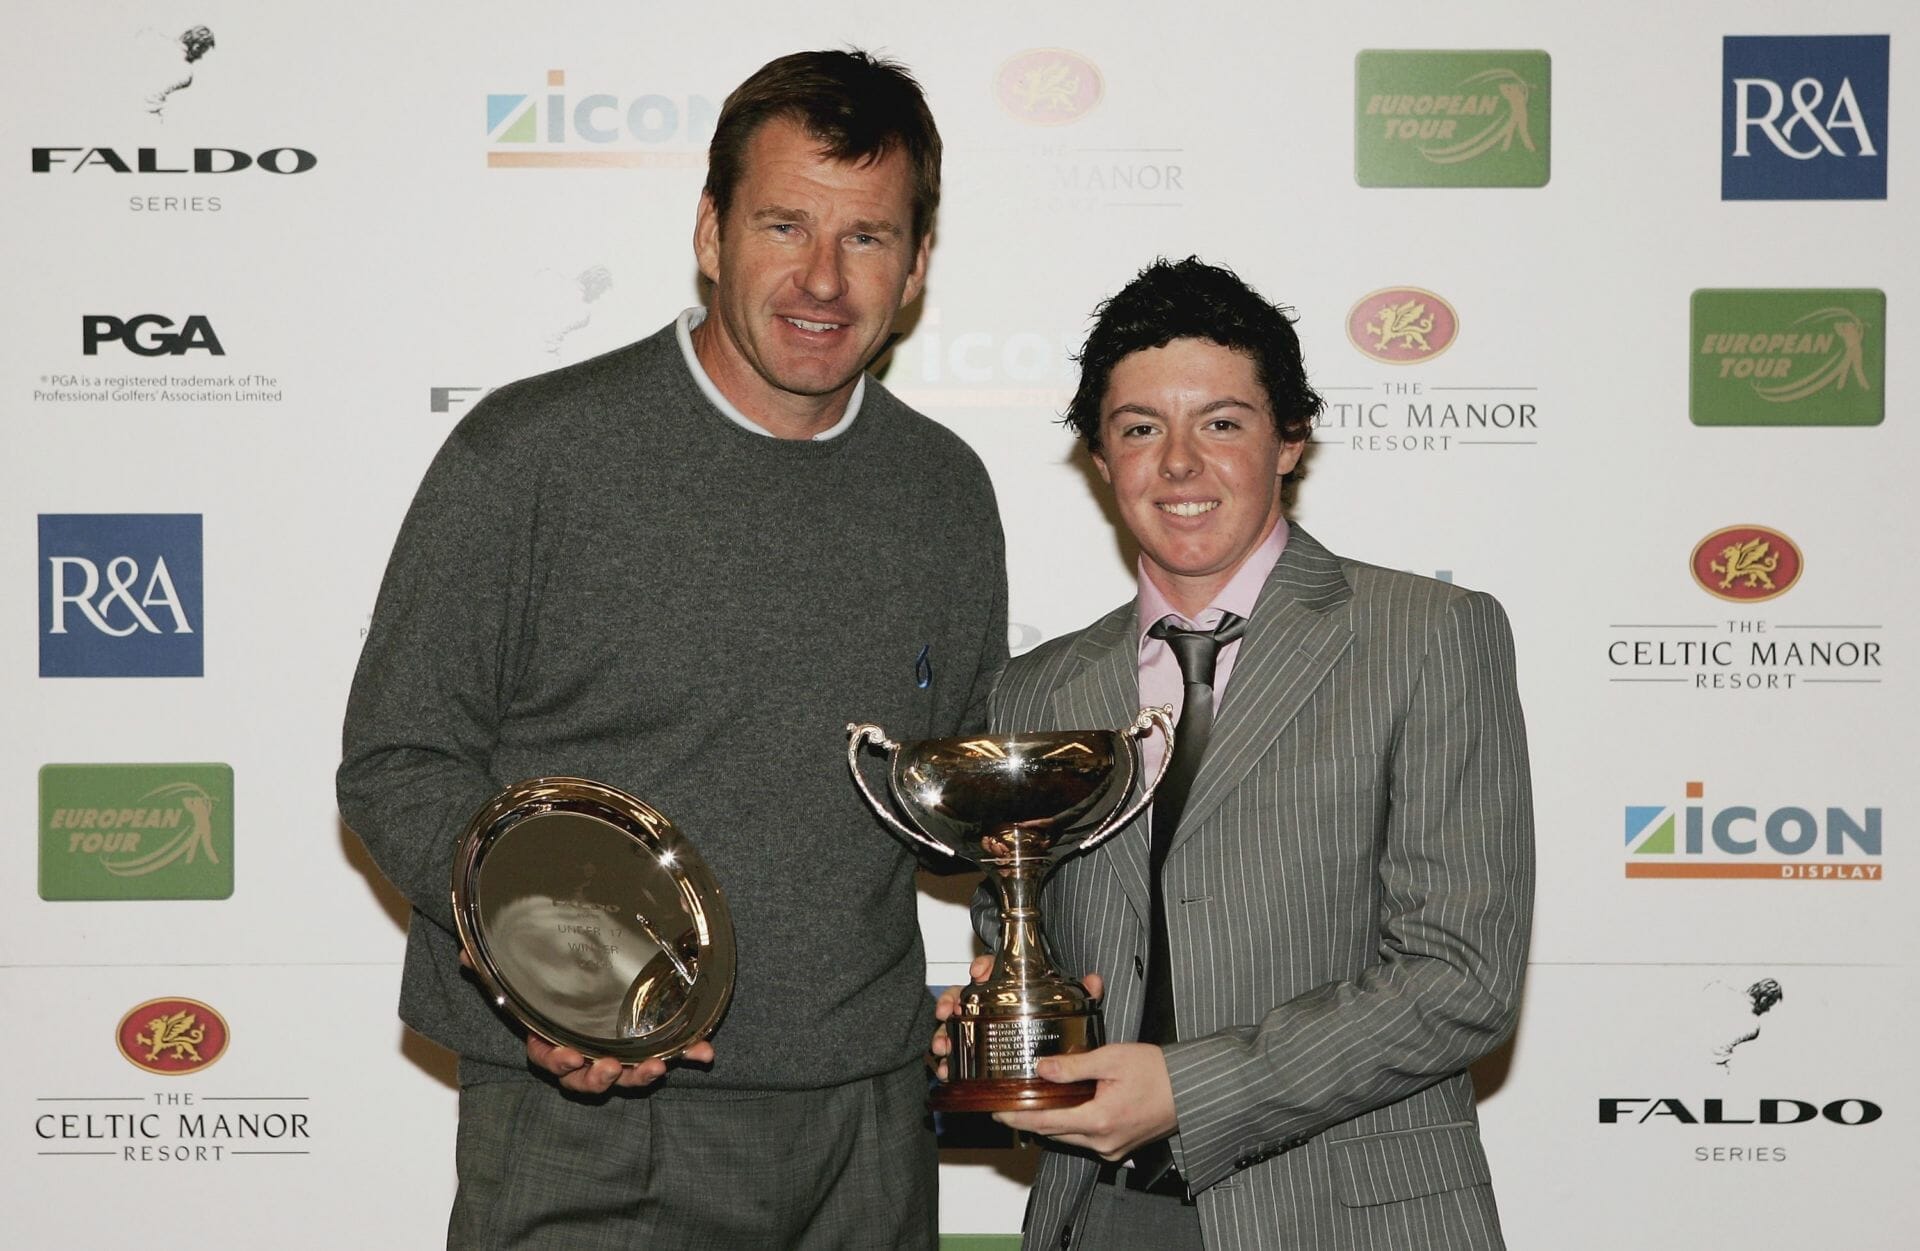 McIlroy out to leapfrog Faldo as game’s third longest serving #1